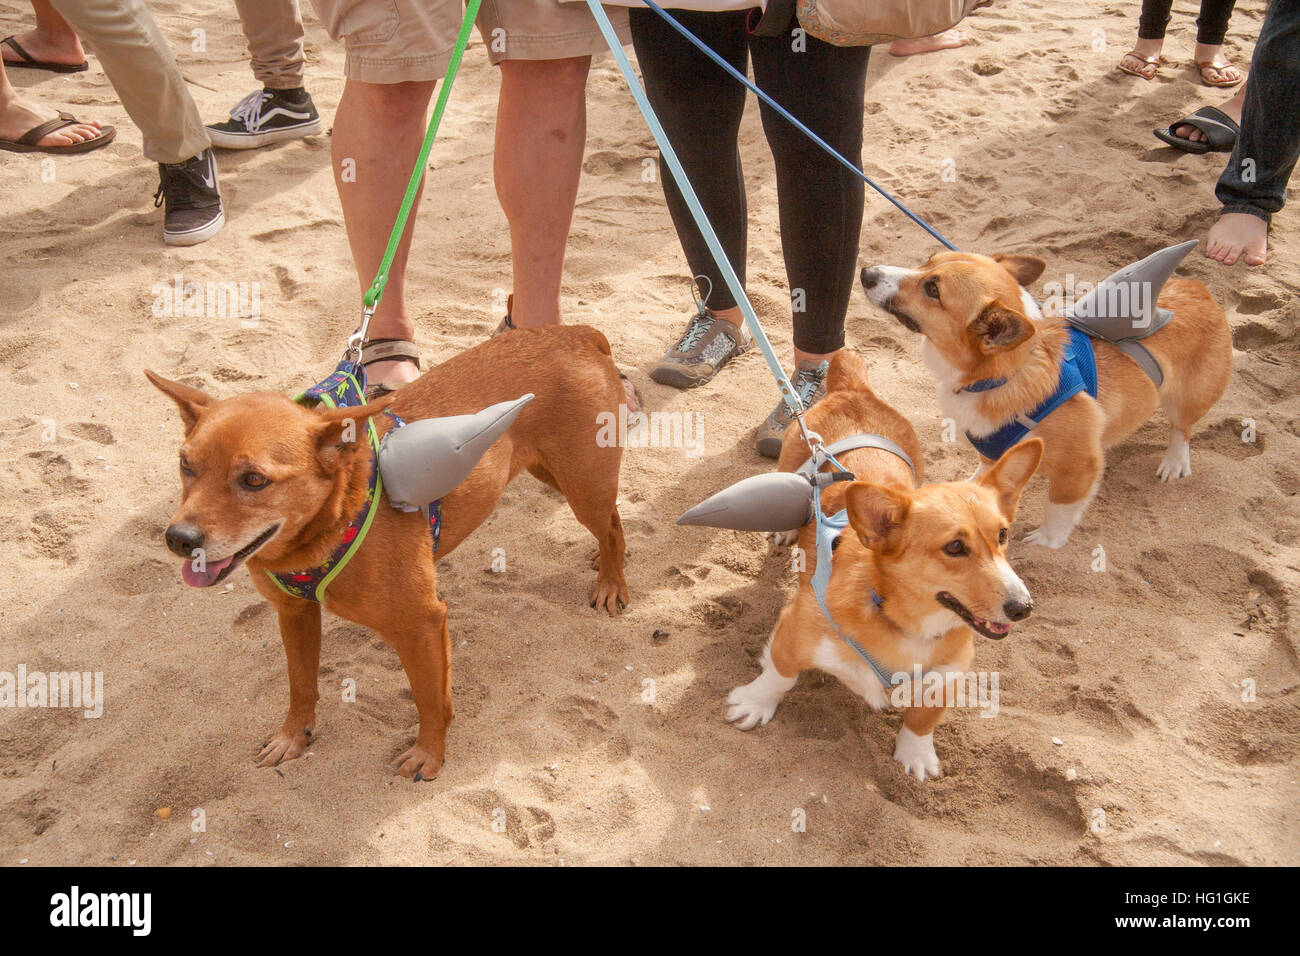 Two Welsh Corgi dogs, right, and an off-breed companion are wearing shark fin costumes at a Corgi dog festival on the sand in Huntington Beach, CA. Stock Photo